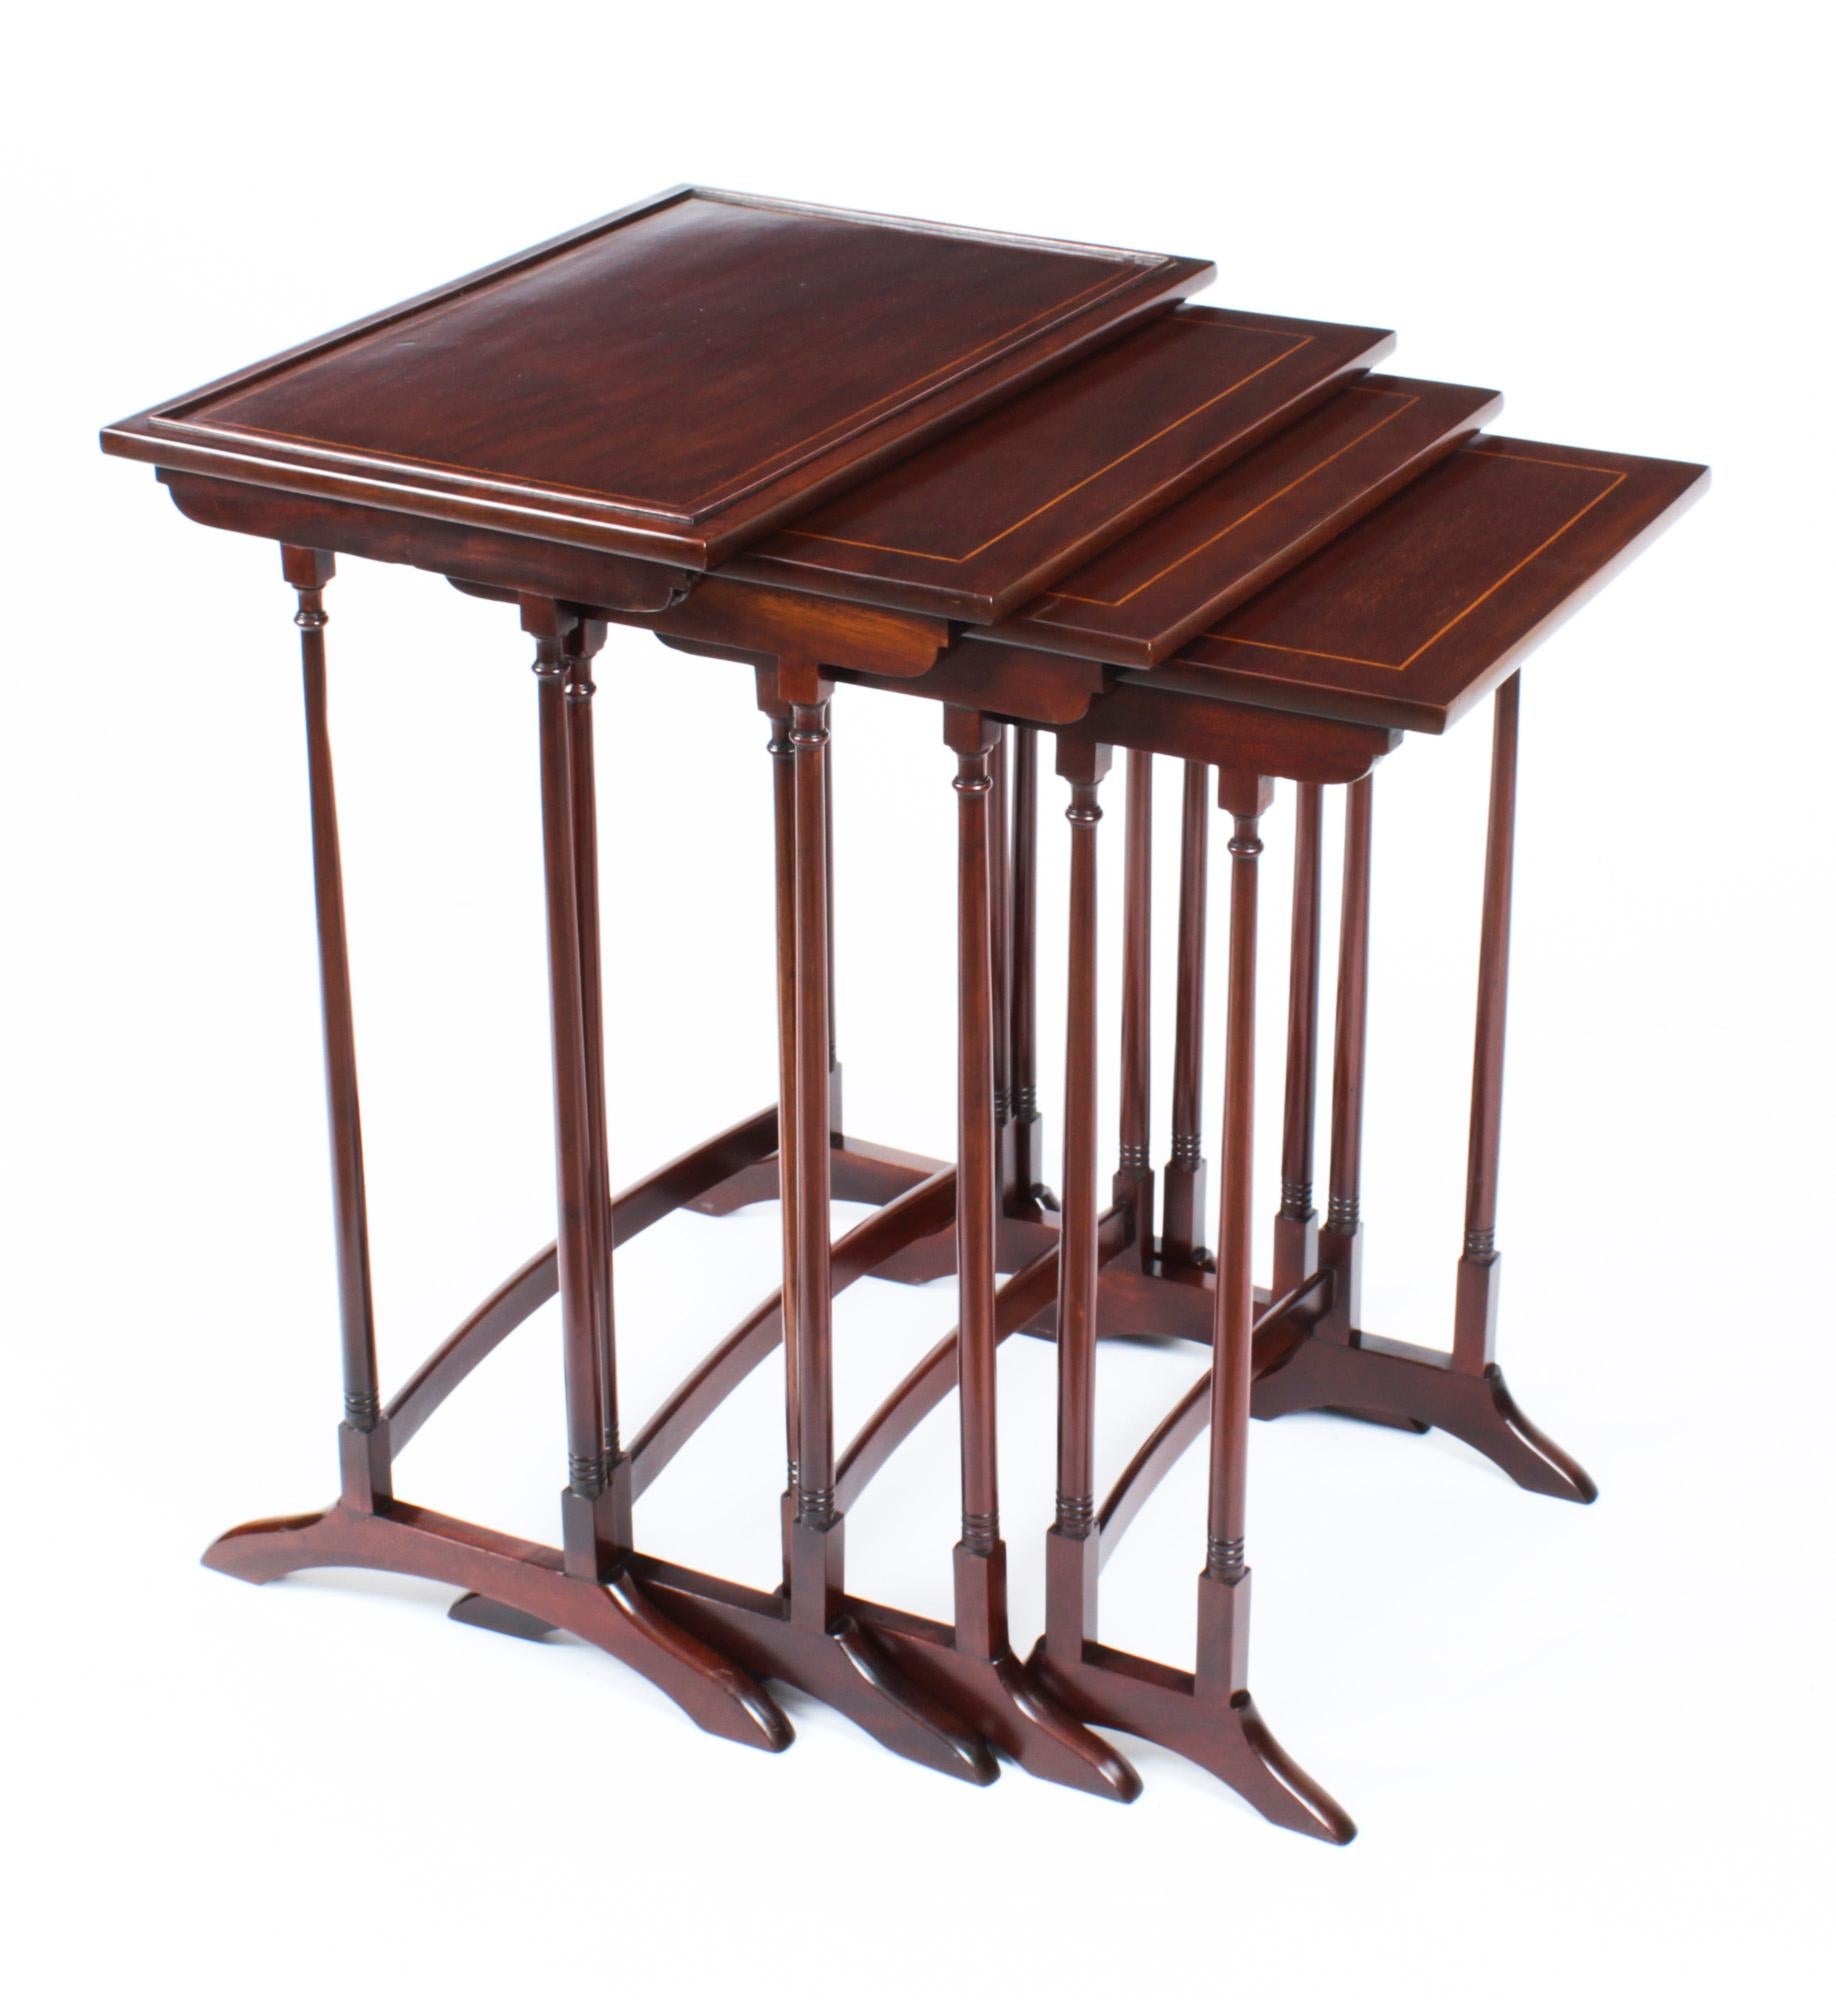 Antique Edwardian Mahogany Nest of Four Tables Early 20th Century For Sale 8